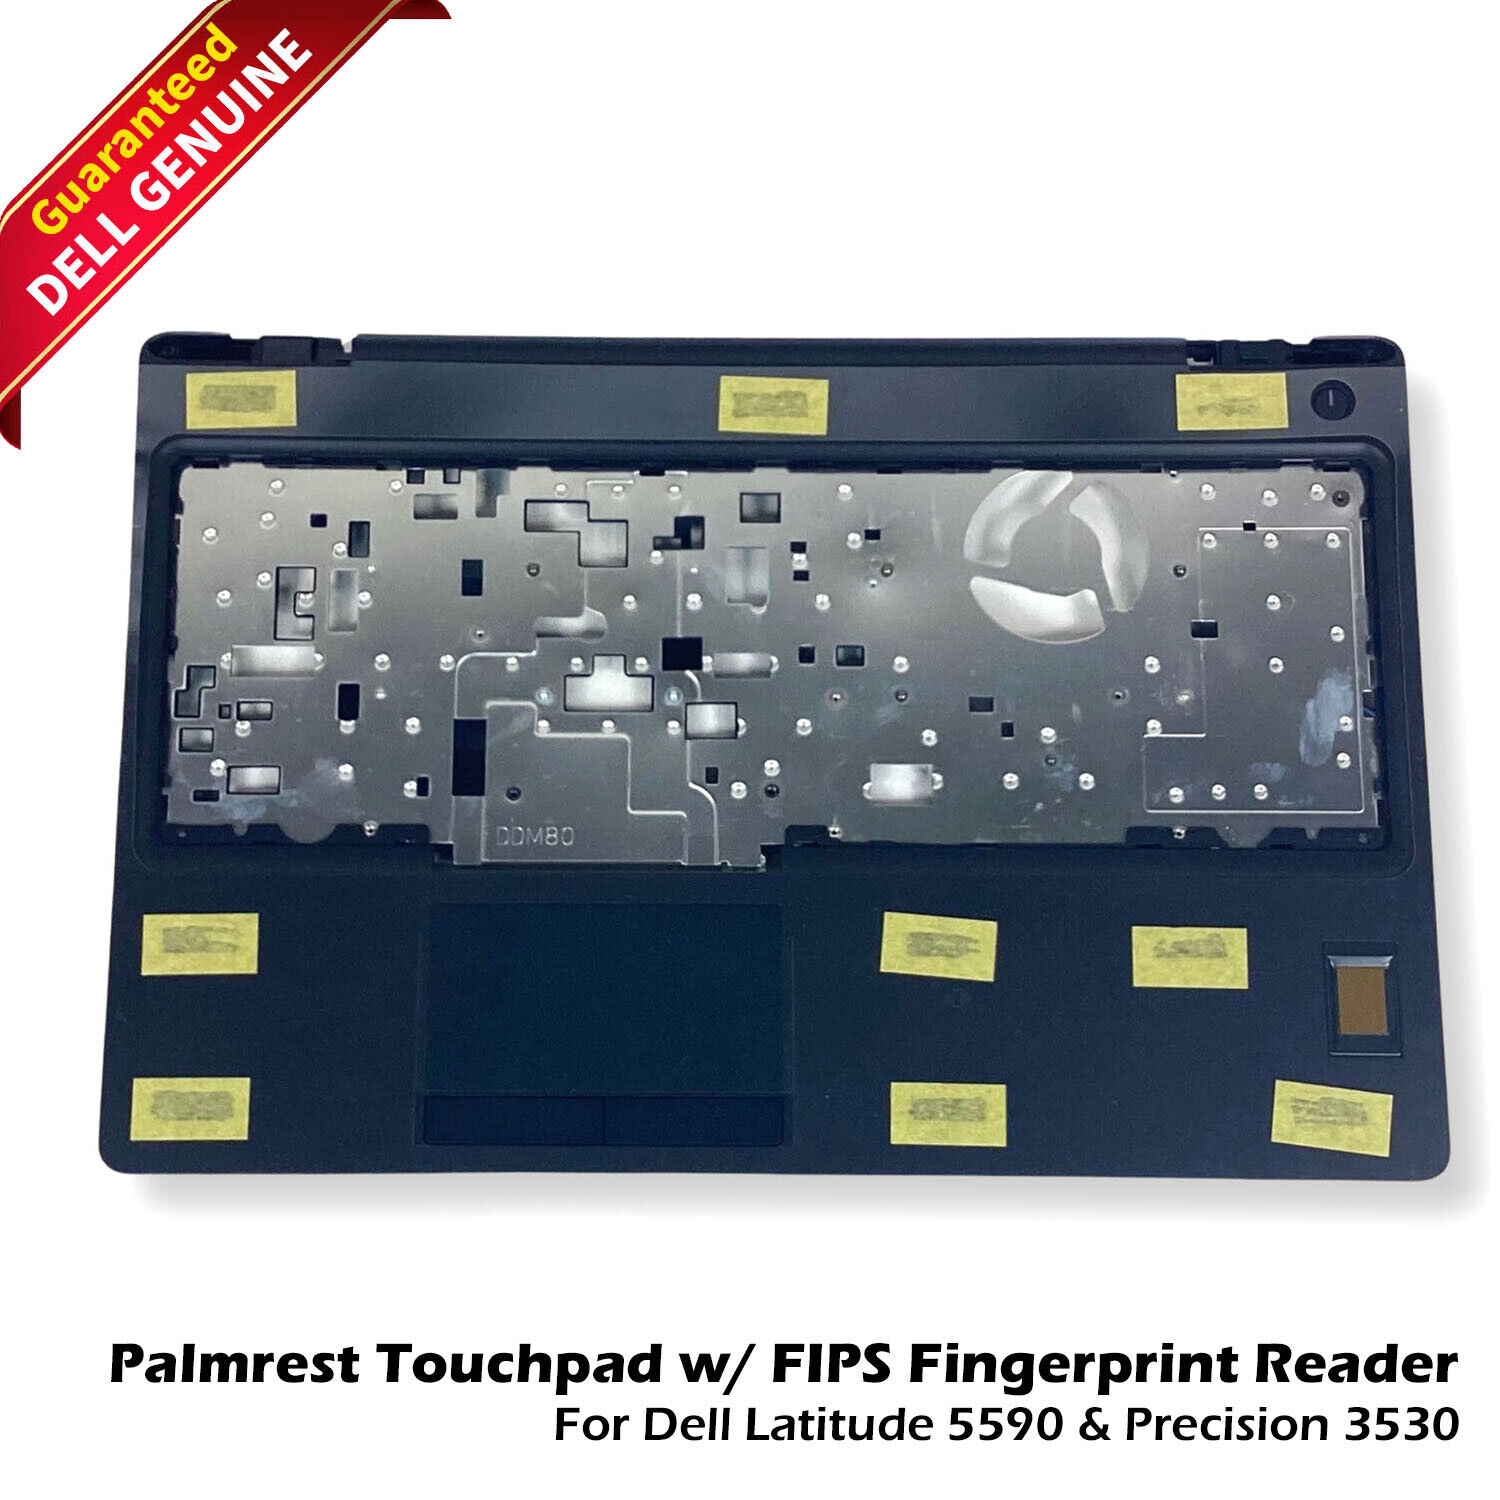 New Dell Latitude 5590 Precision 3530 Palmrest Touchpad Assembly A174PC XVKRY